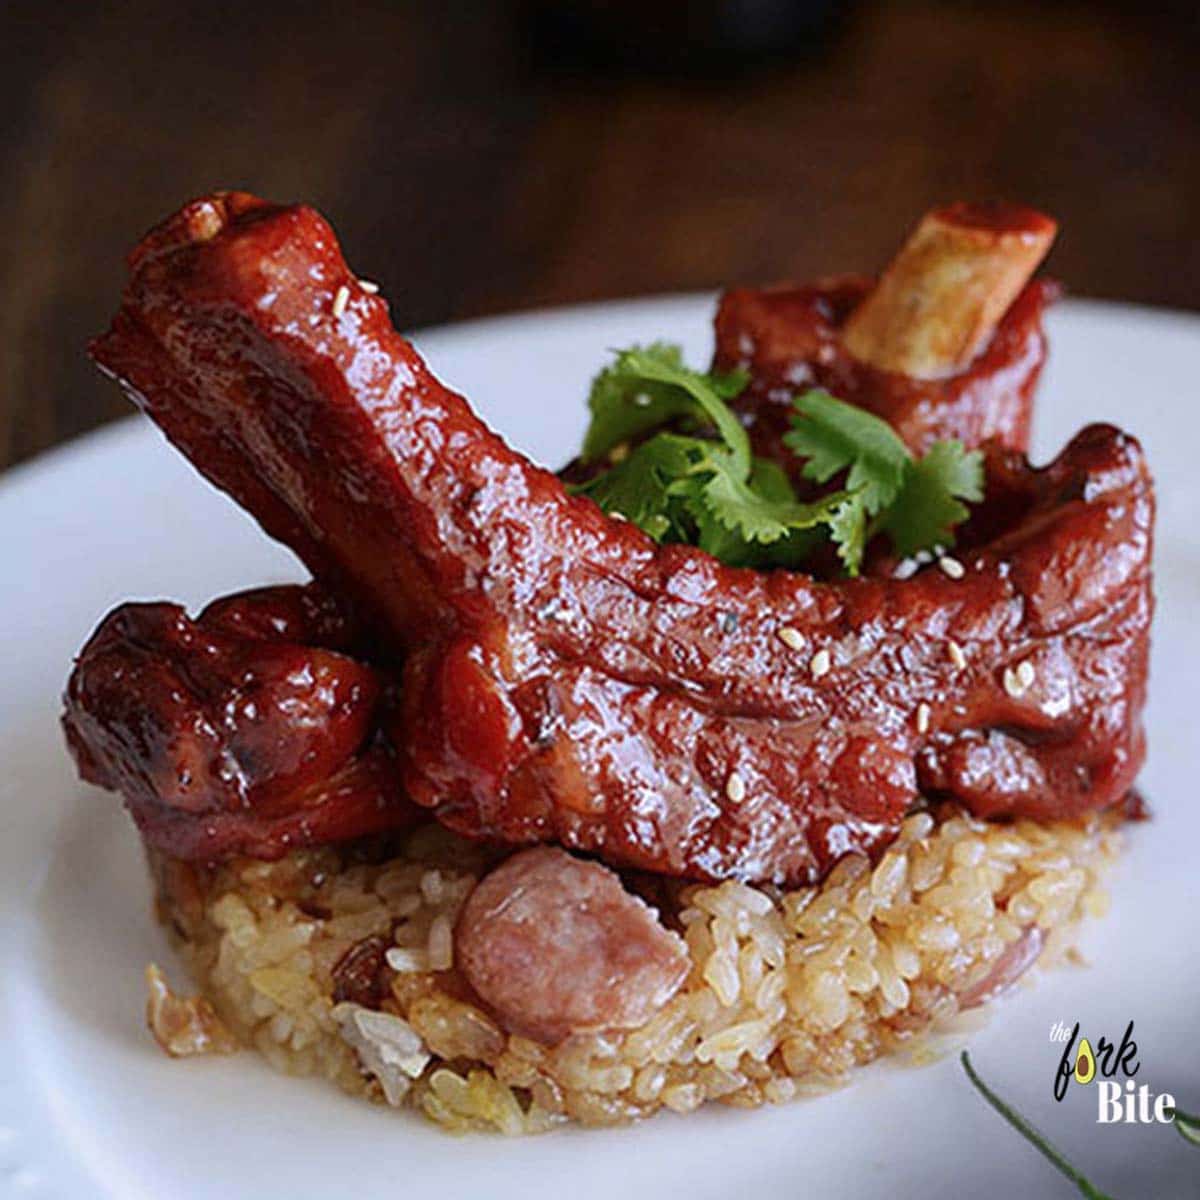 These are the sticky pork ribs that you could probably have every weekend. These Asian Pork Ribs are delicious and super easy recipe, which you could have on your own or serve to your family and friends in no time at all.